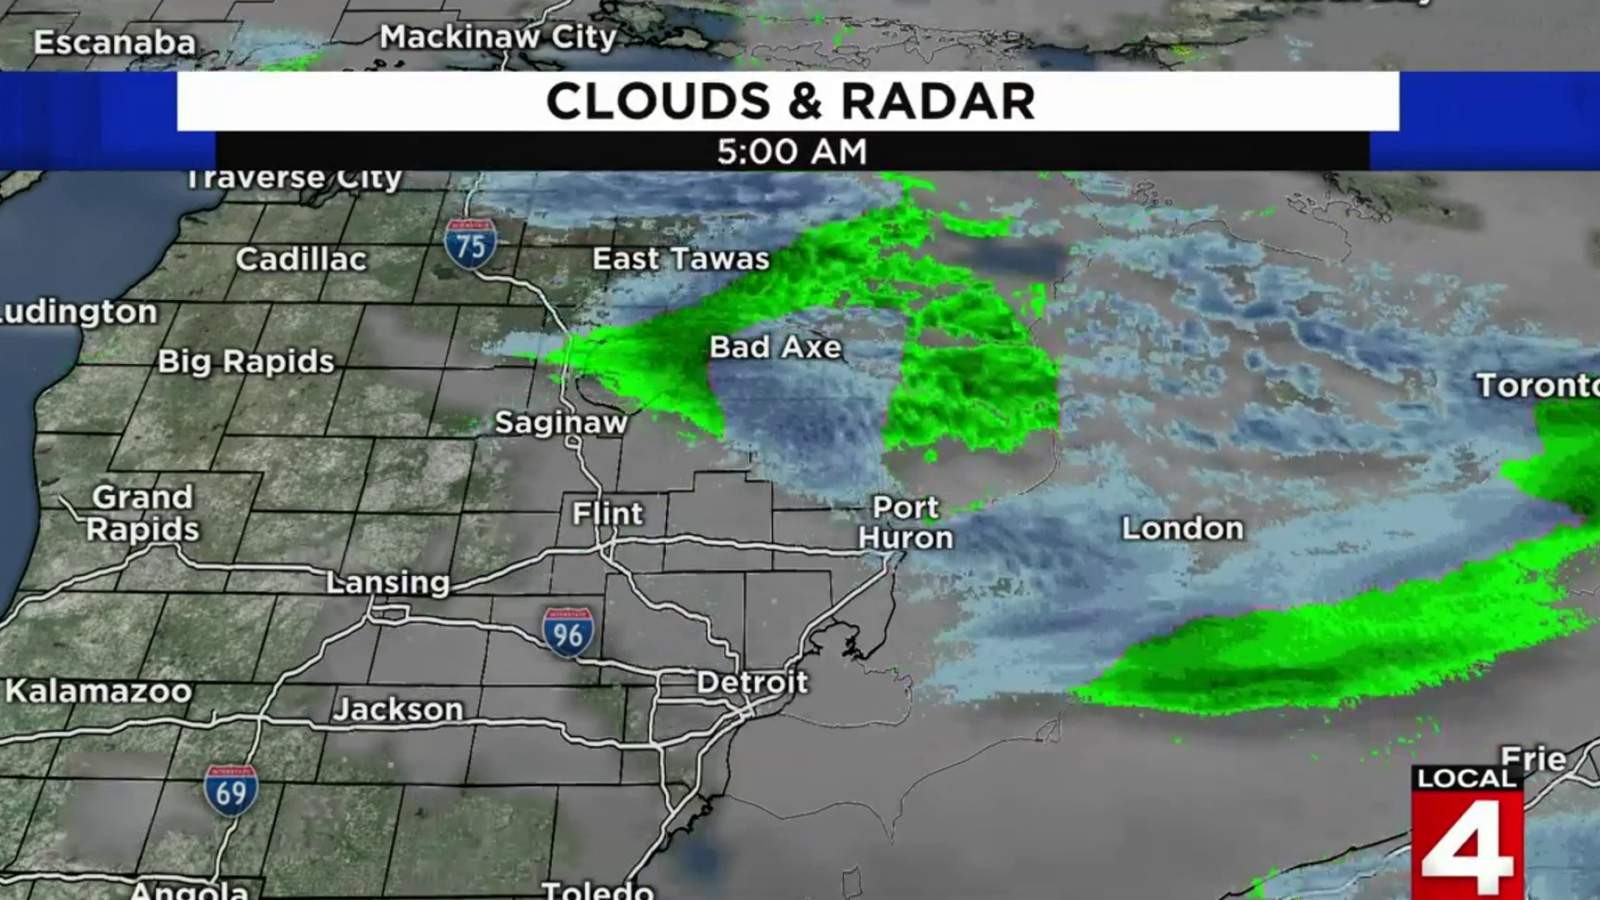 Metro Detroit weather: Here’s what to expect Friday, this weekend